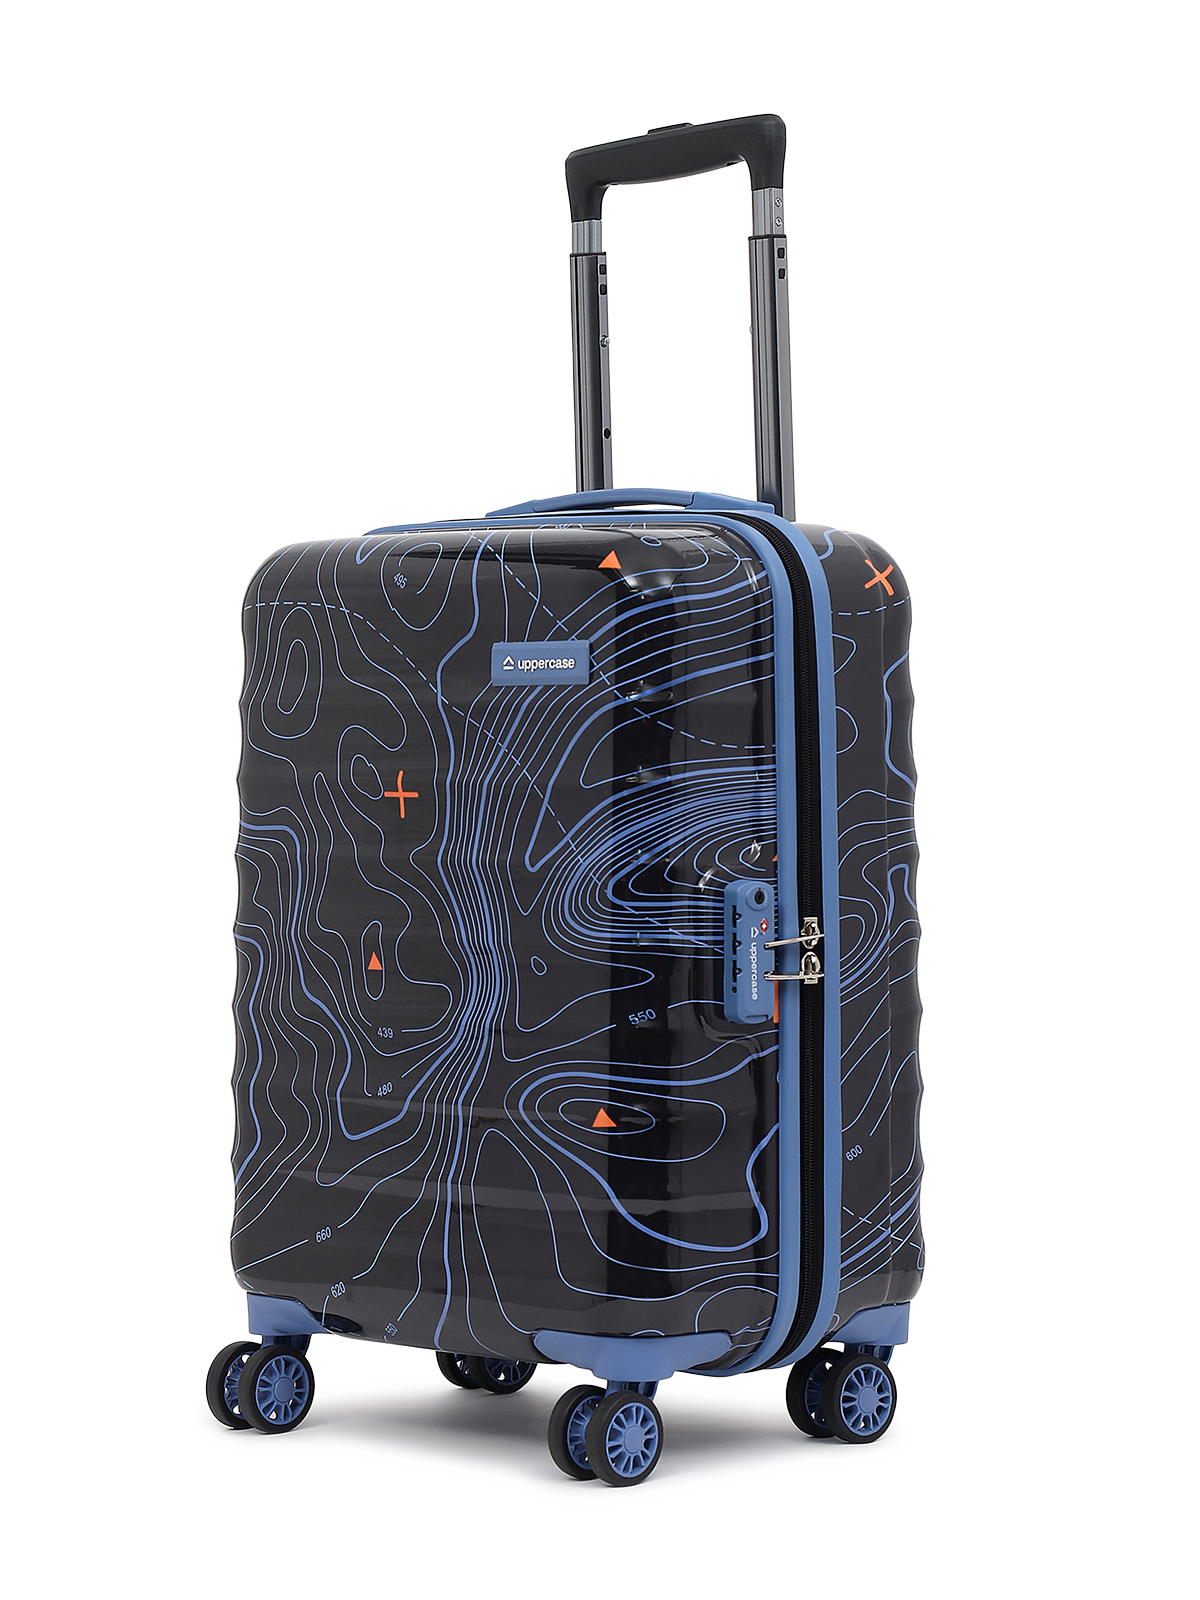 Genie Paramour Trolley Bag Small Size, 57 cms Blue Printed Soft Luggage  Travel Bag for Women, 8 Wheel Small Luggage Suitcase for Travelling,  Cabin-Friendly Small Suitcase | Dealsmagnet.com